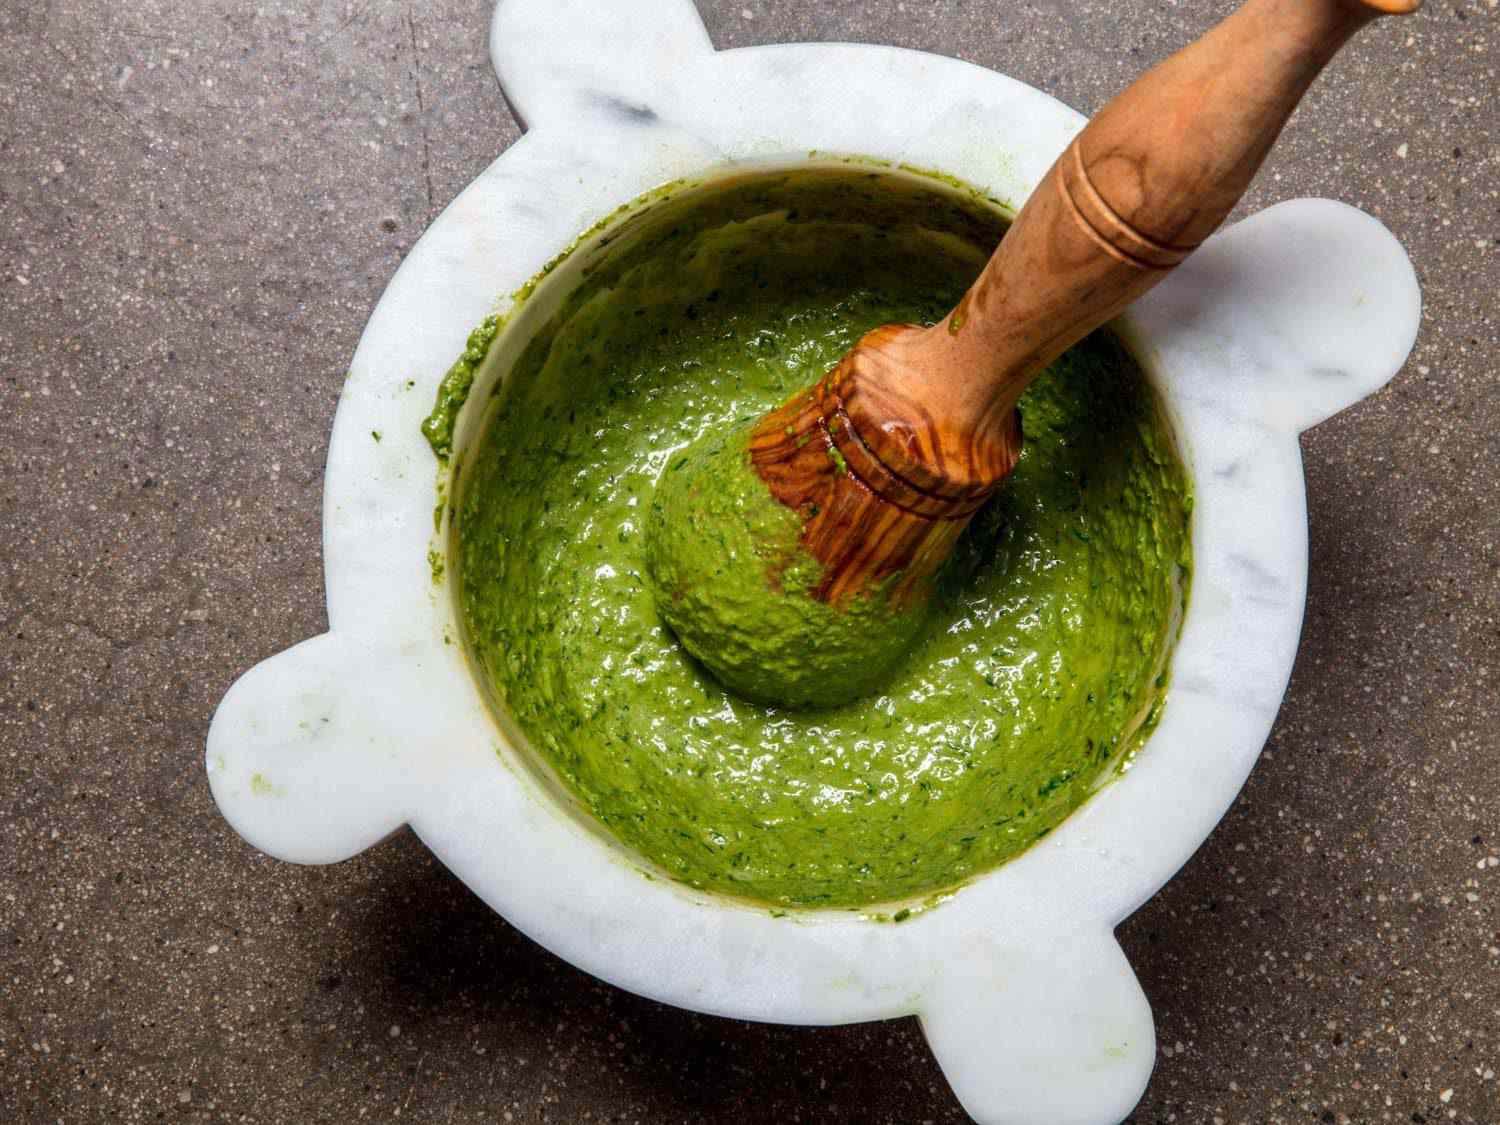 Finished pesto in a marble mortar and pestle